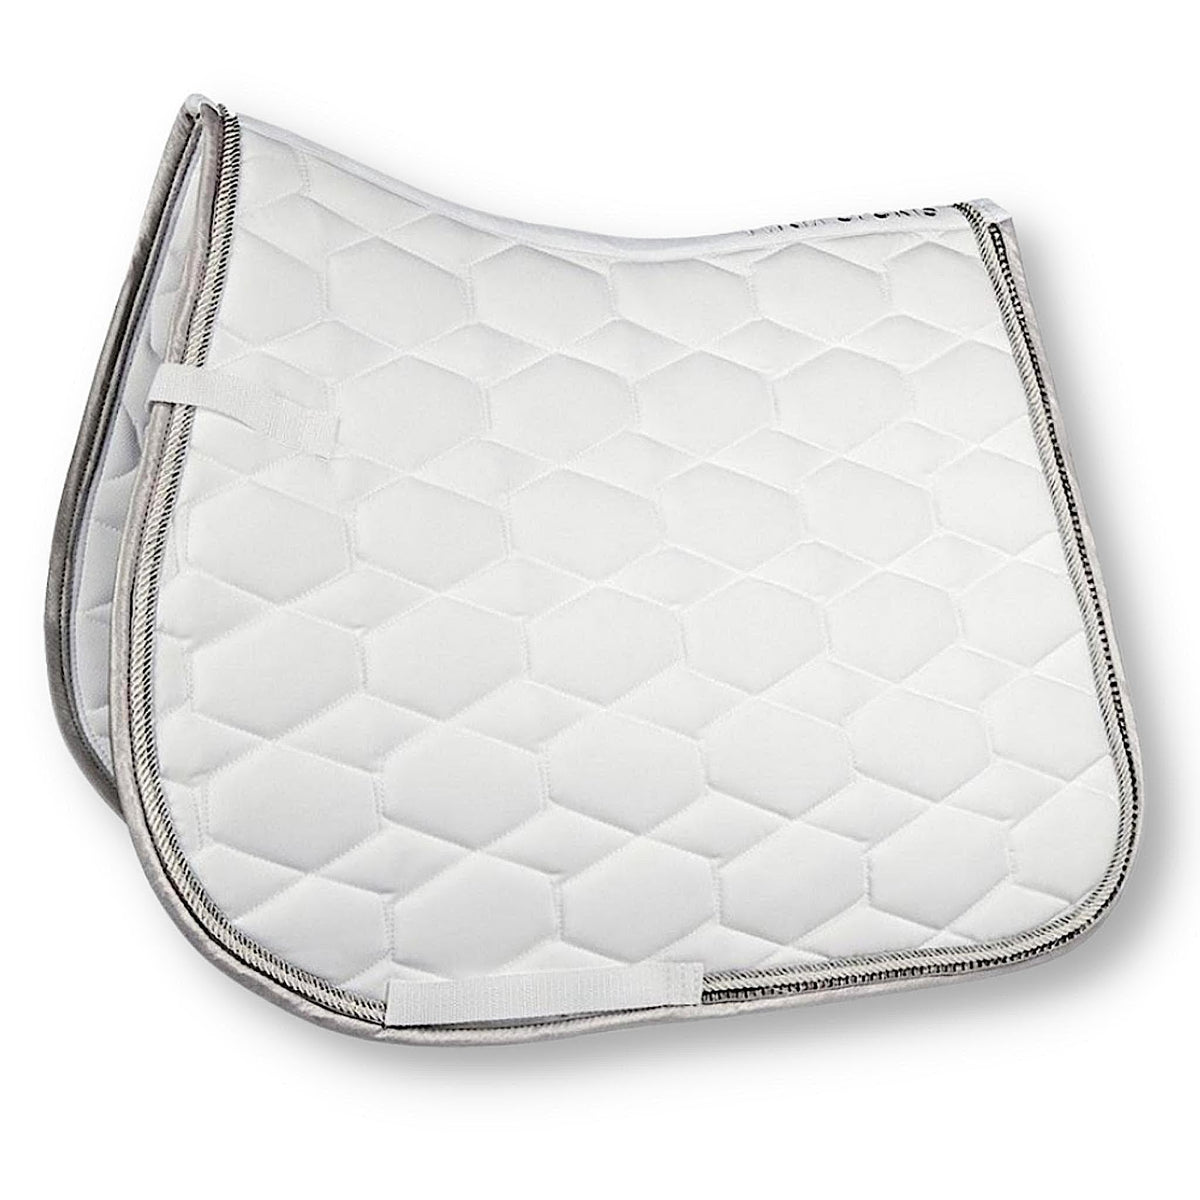 White dressage saddle pad with white keepers and clear diamante row trim.